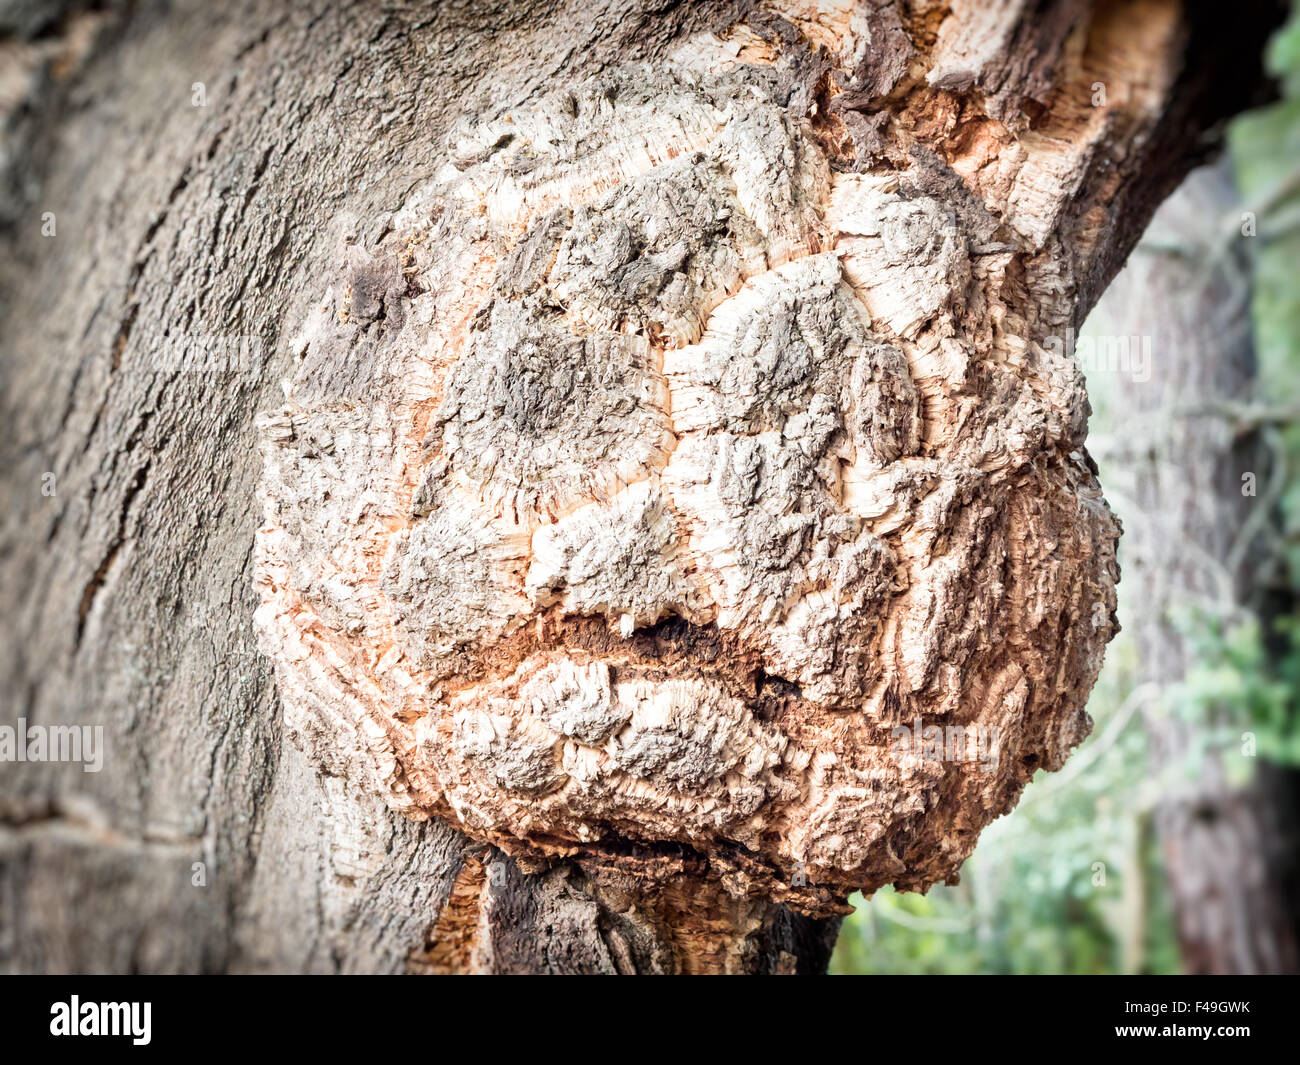 petrified forest haunted, tree with scared expression . Stock Photo